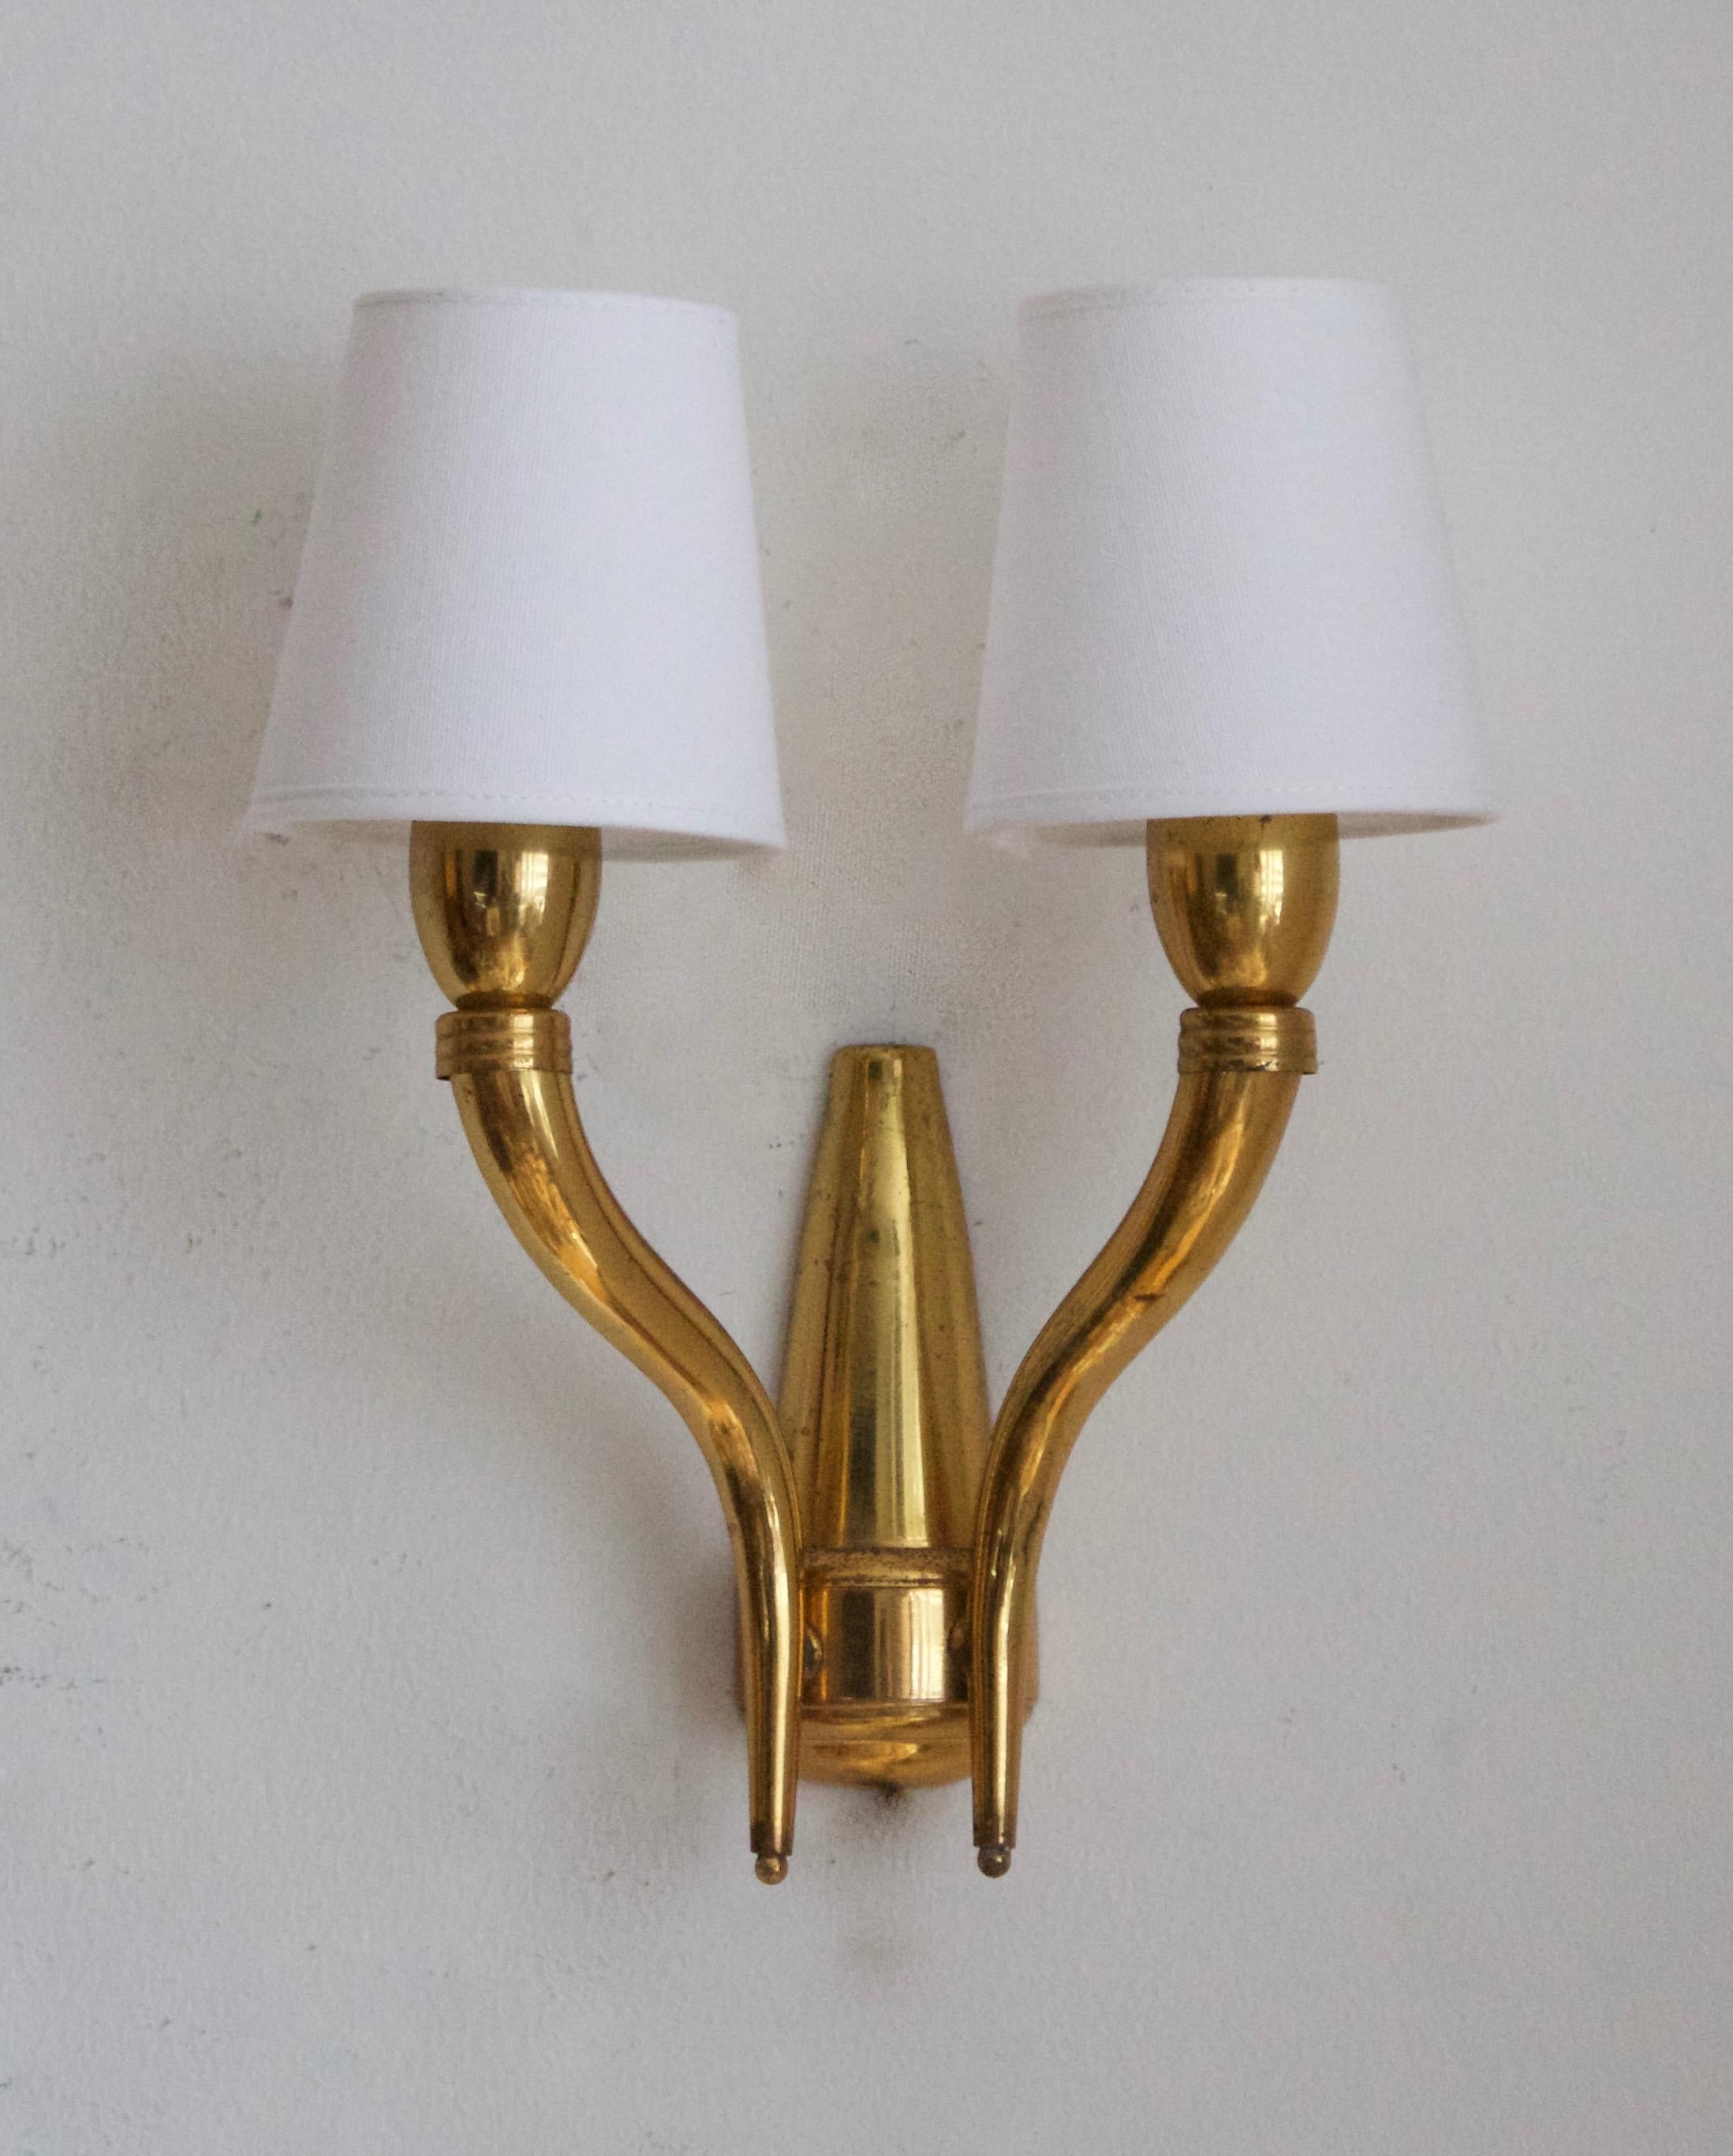 A pair of wall light / scones. Designed and produced in Italy, 1940s.

Stated dimensions include lampshades. Illustrated brand new lampshades are included in purchase upon request.

Other designers of the period include Paavo Tynell, Jean